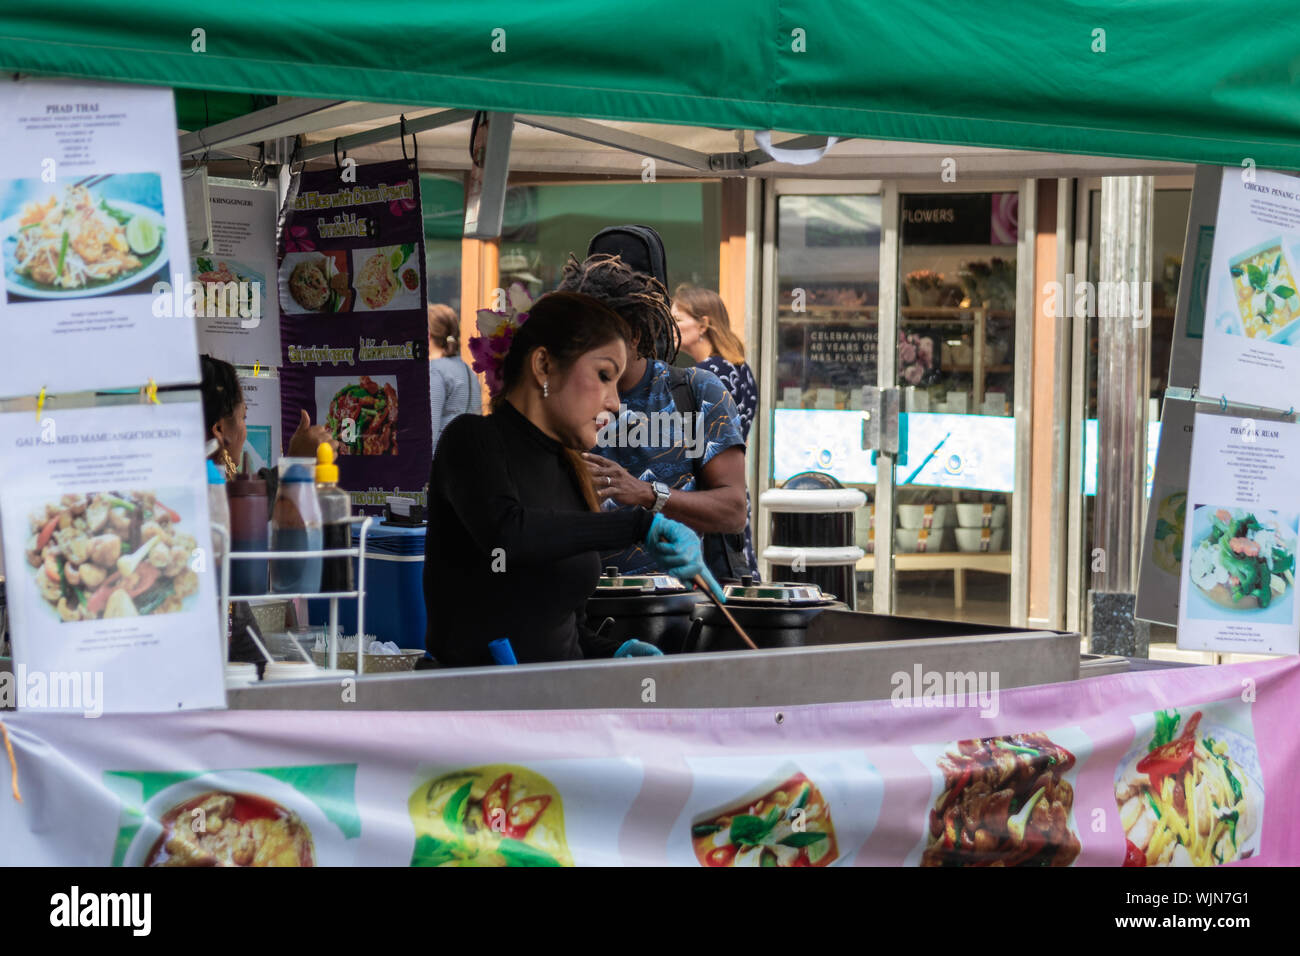 Winchester, Hampshire, UK A Thai lady cooking street food at a market stall for sale to the public Stock Photo